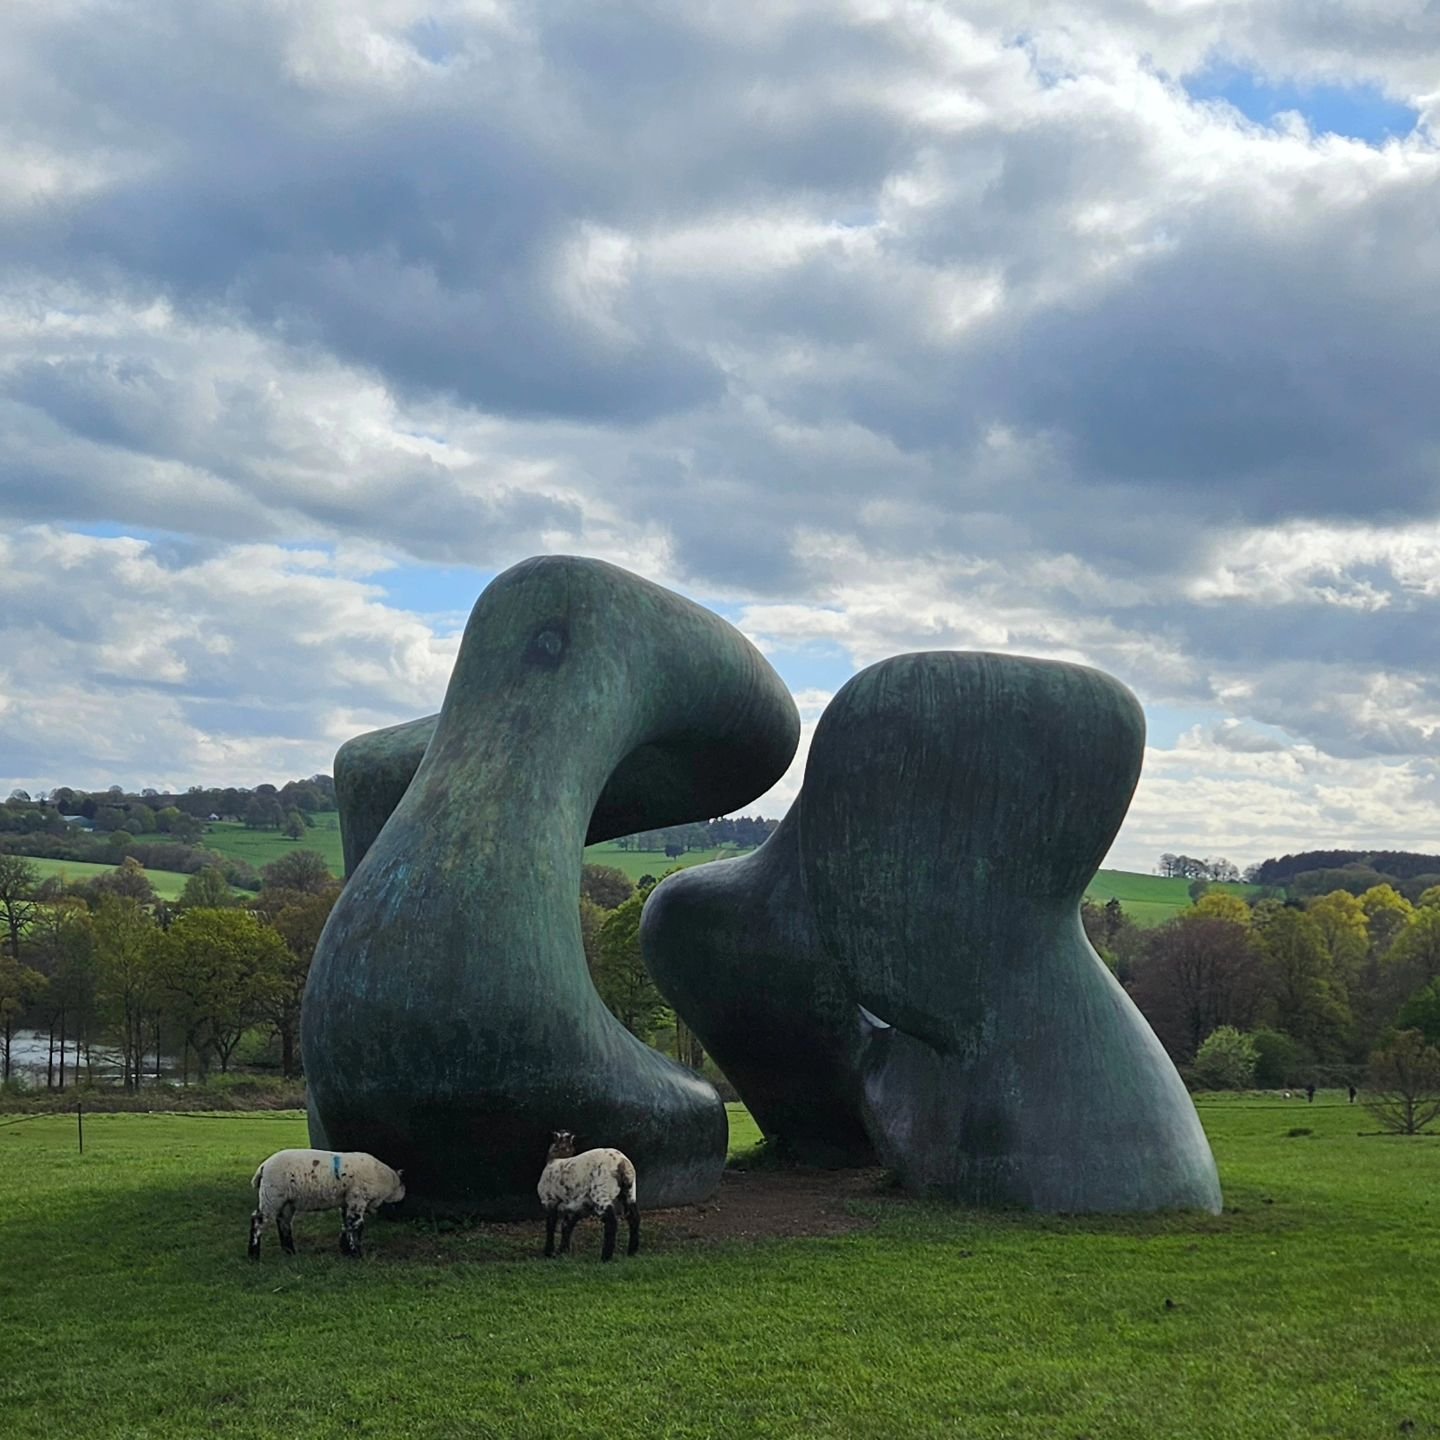 This place is stunning, beautiful sculptures set out across acres of rolling Yorkshire countryside #sculpture #henrymoore